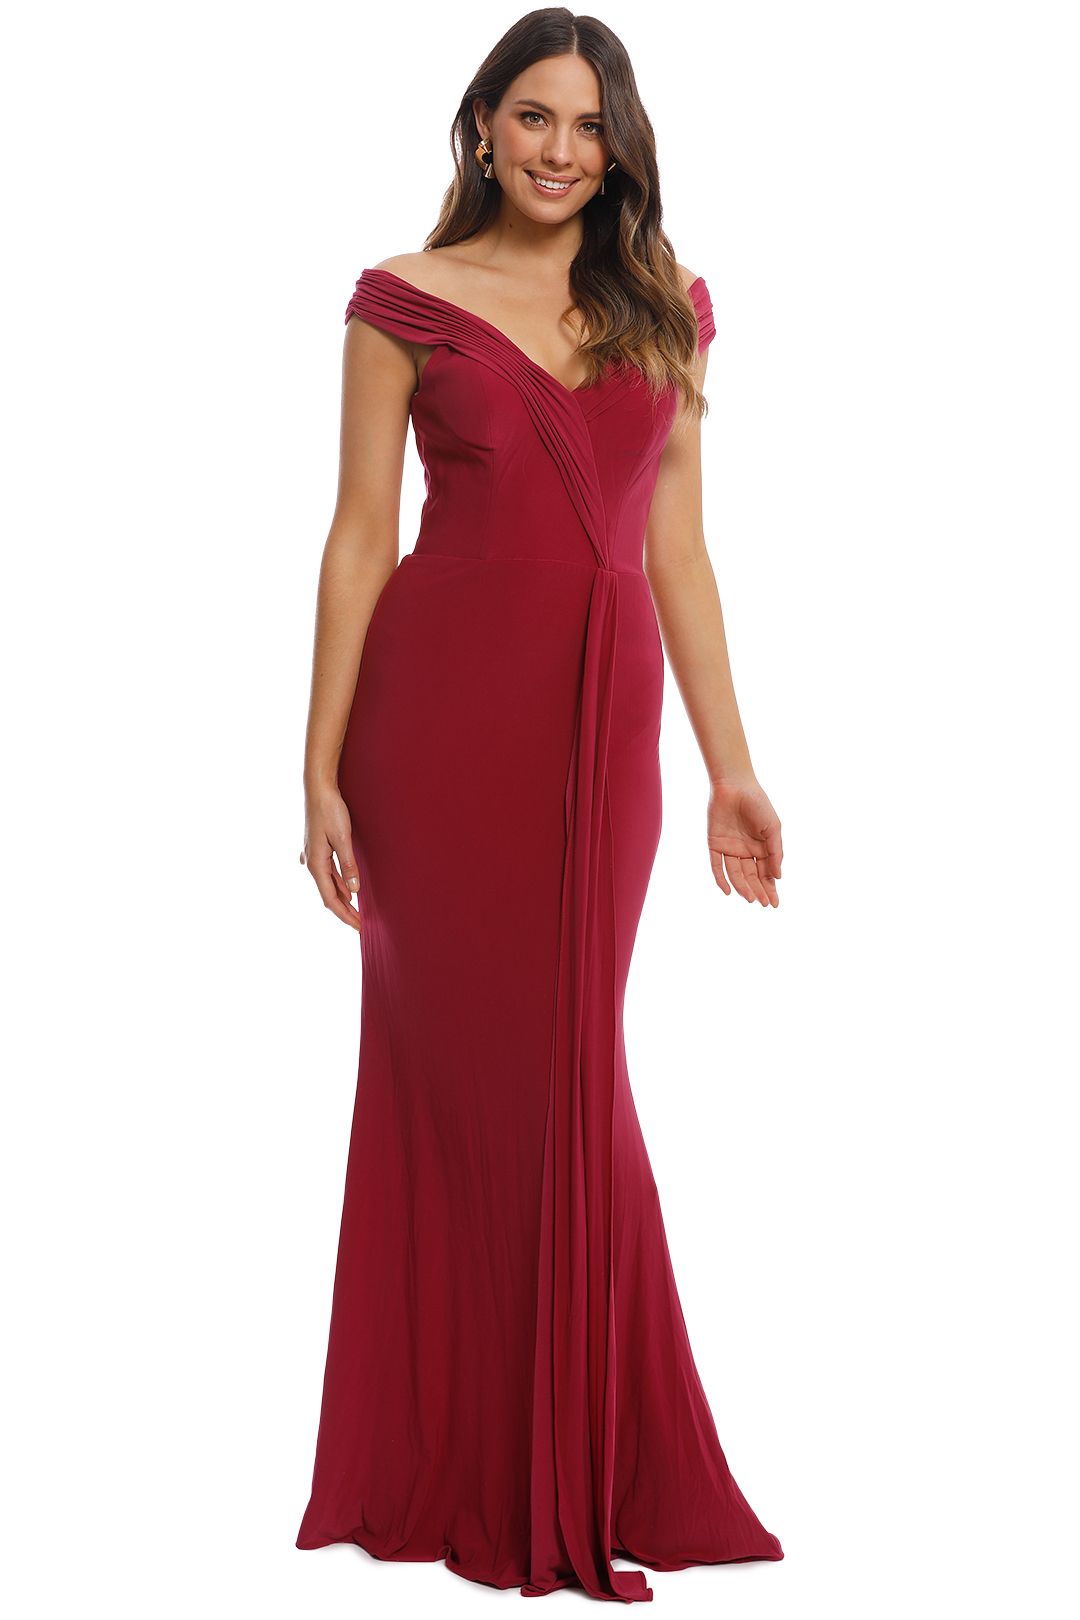 Tania Olsen - Malissa Gown - Berry - Front